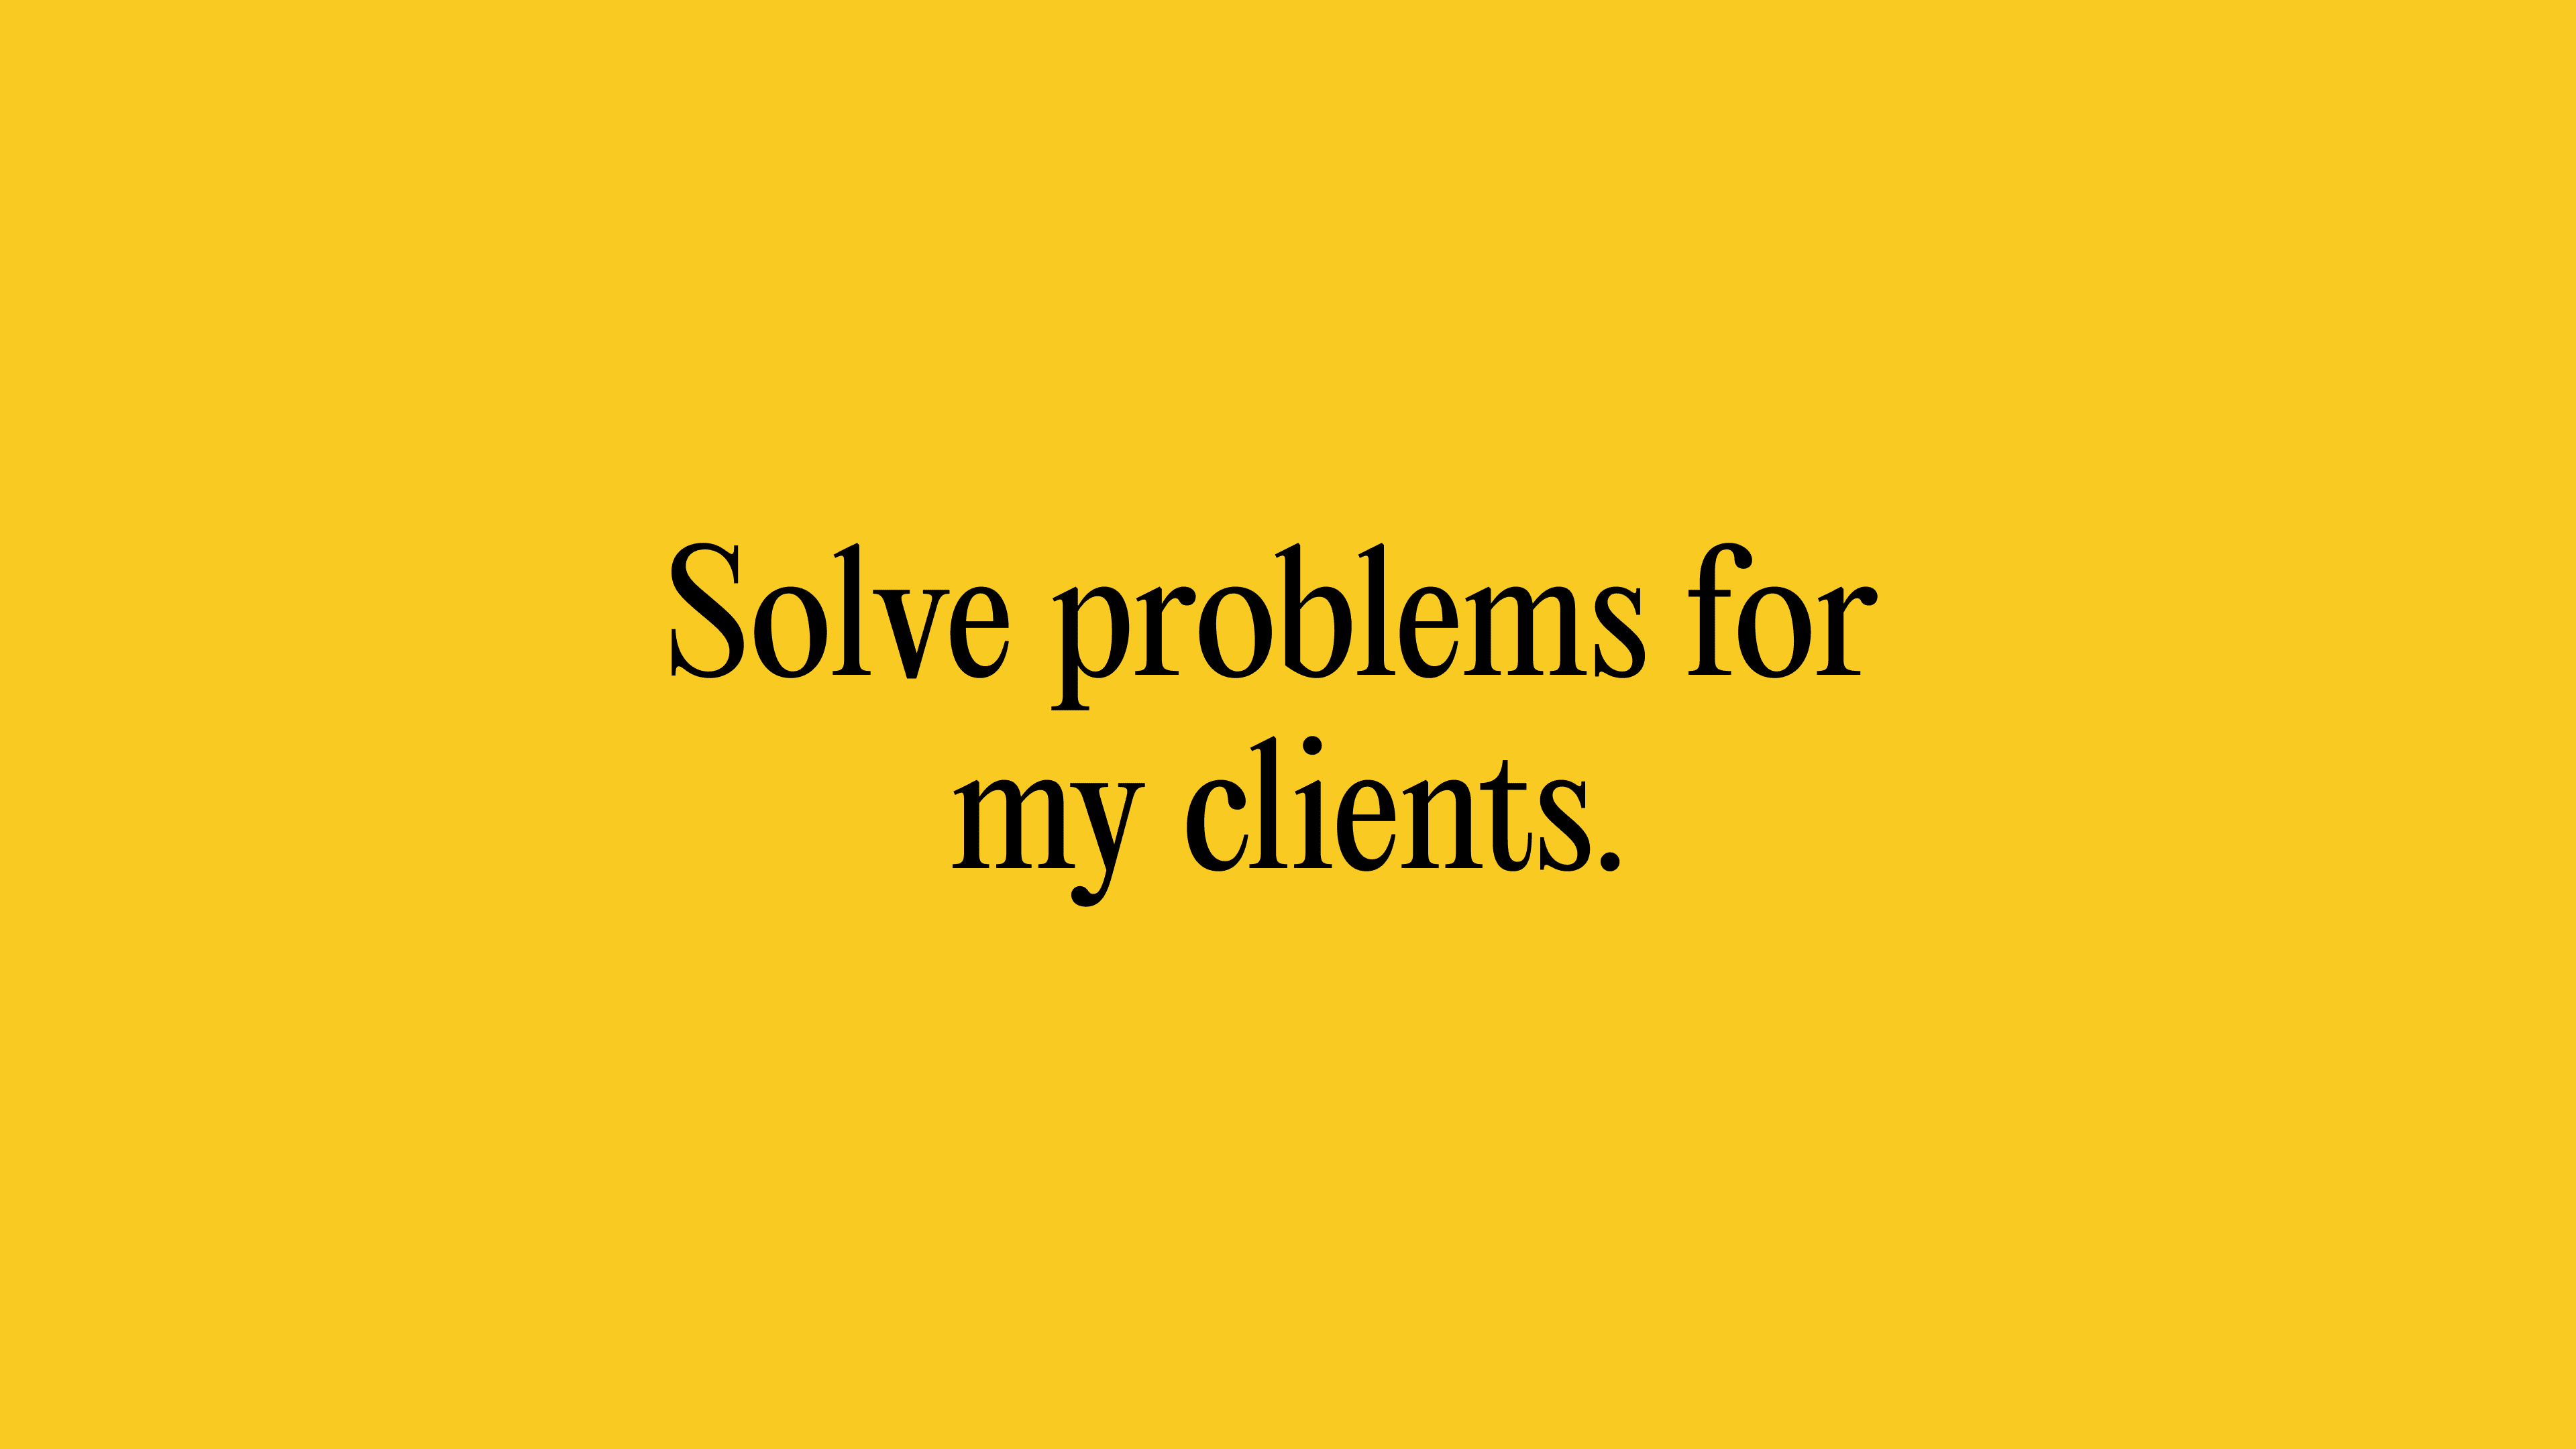 clients are hard